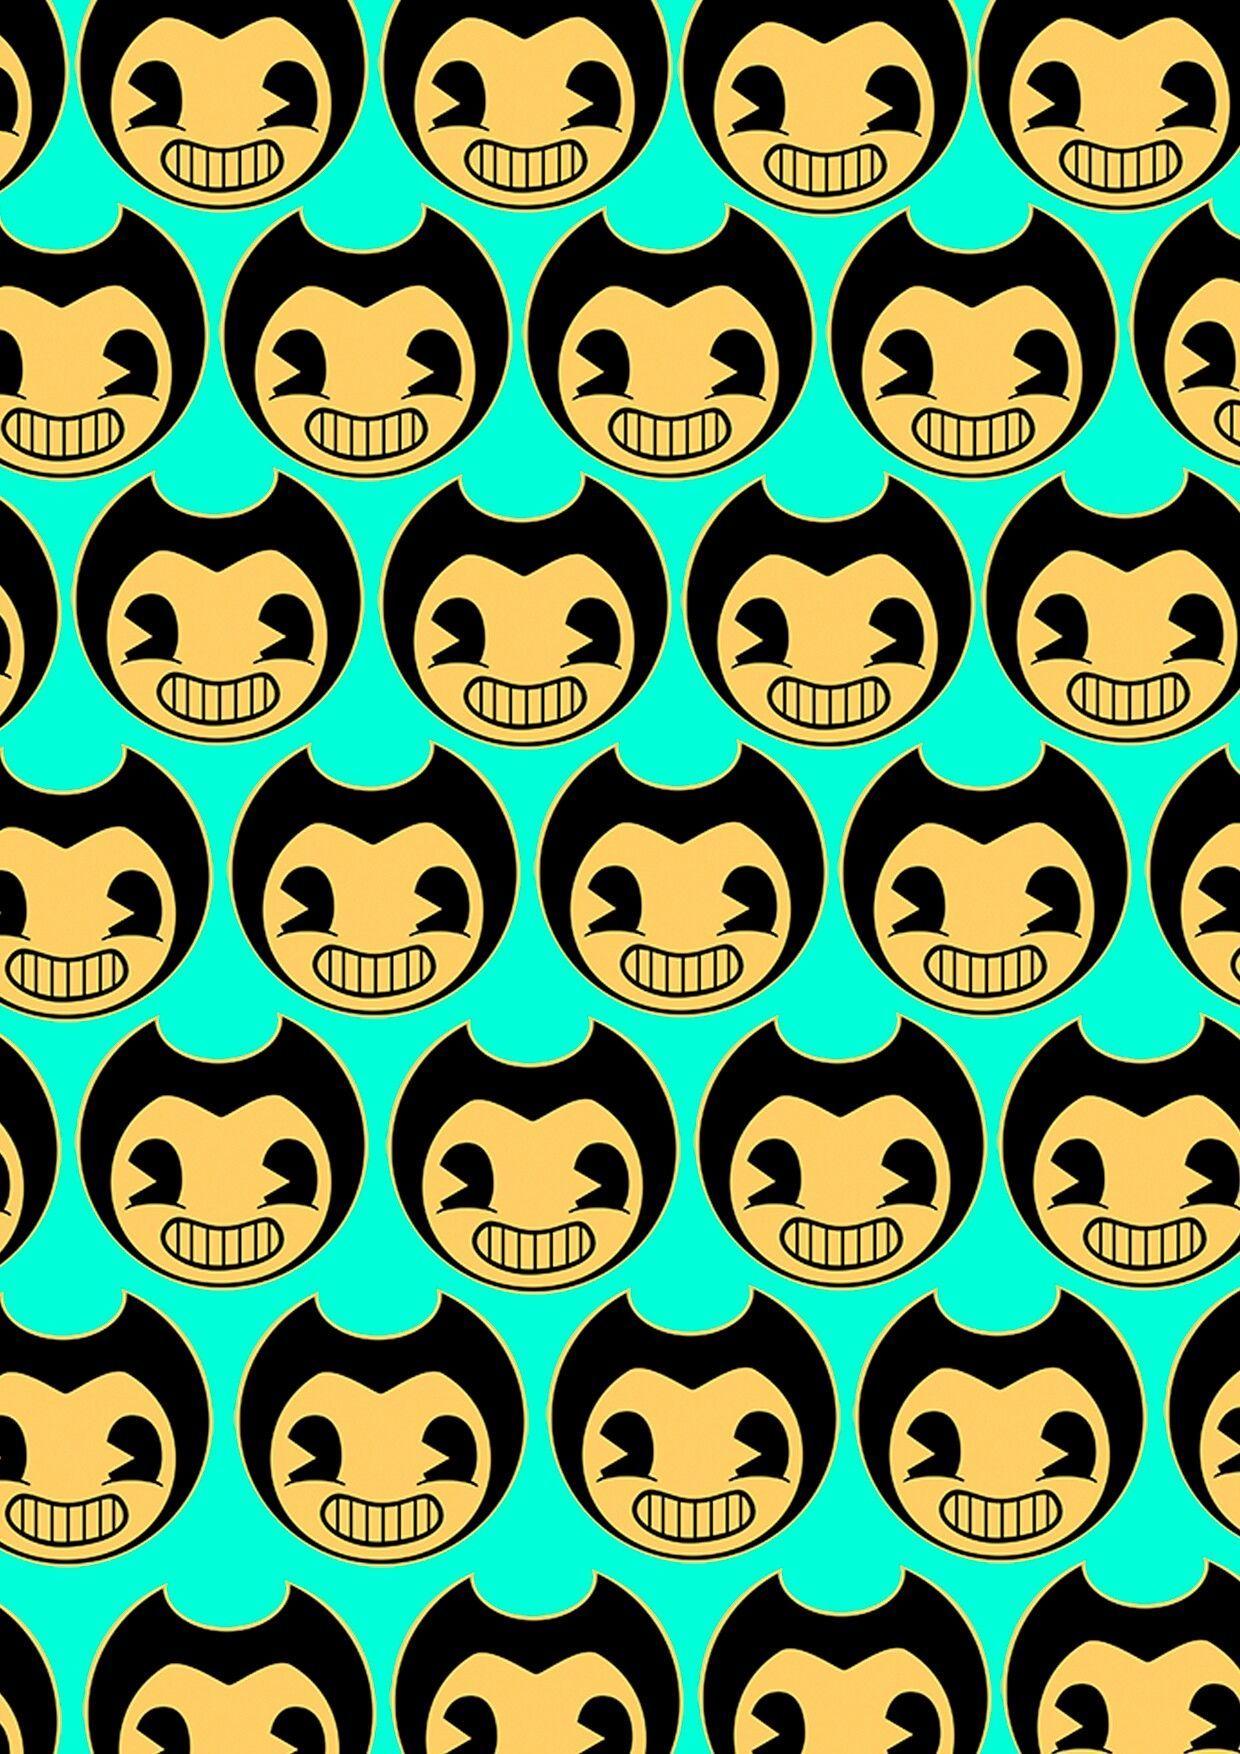 Bendy and The Ink Machine Wallpaper. Jace. Bendy, the ink machine